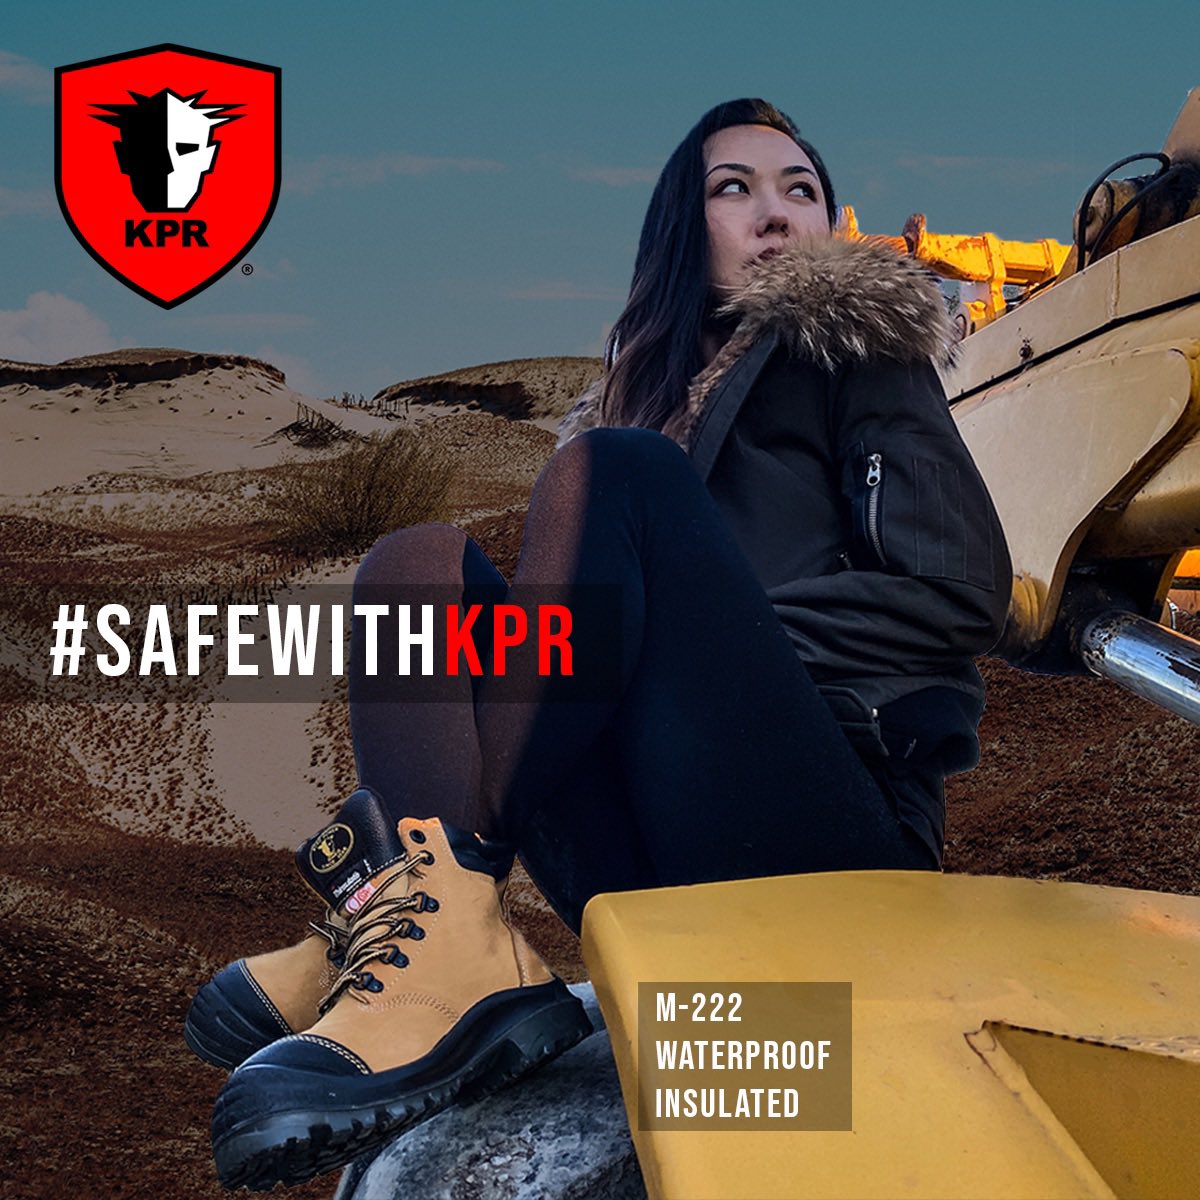 Get #readyforwinter w/ KPR’s #madeintoronto 🇨🇦 M-222 #waterproof 3M Thinsulate-lined CSA #safetyboots 🥾 - available in black/wheat - now 50% off w/ #freeshipping! kprsafety.com/featured to #staywarm & stay #safewithkpr!
-
Follow & DM @KPRSafetyCo to get a bonus #PromoCode!